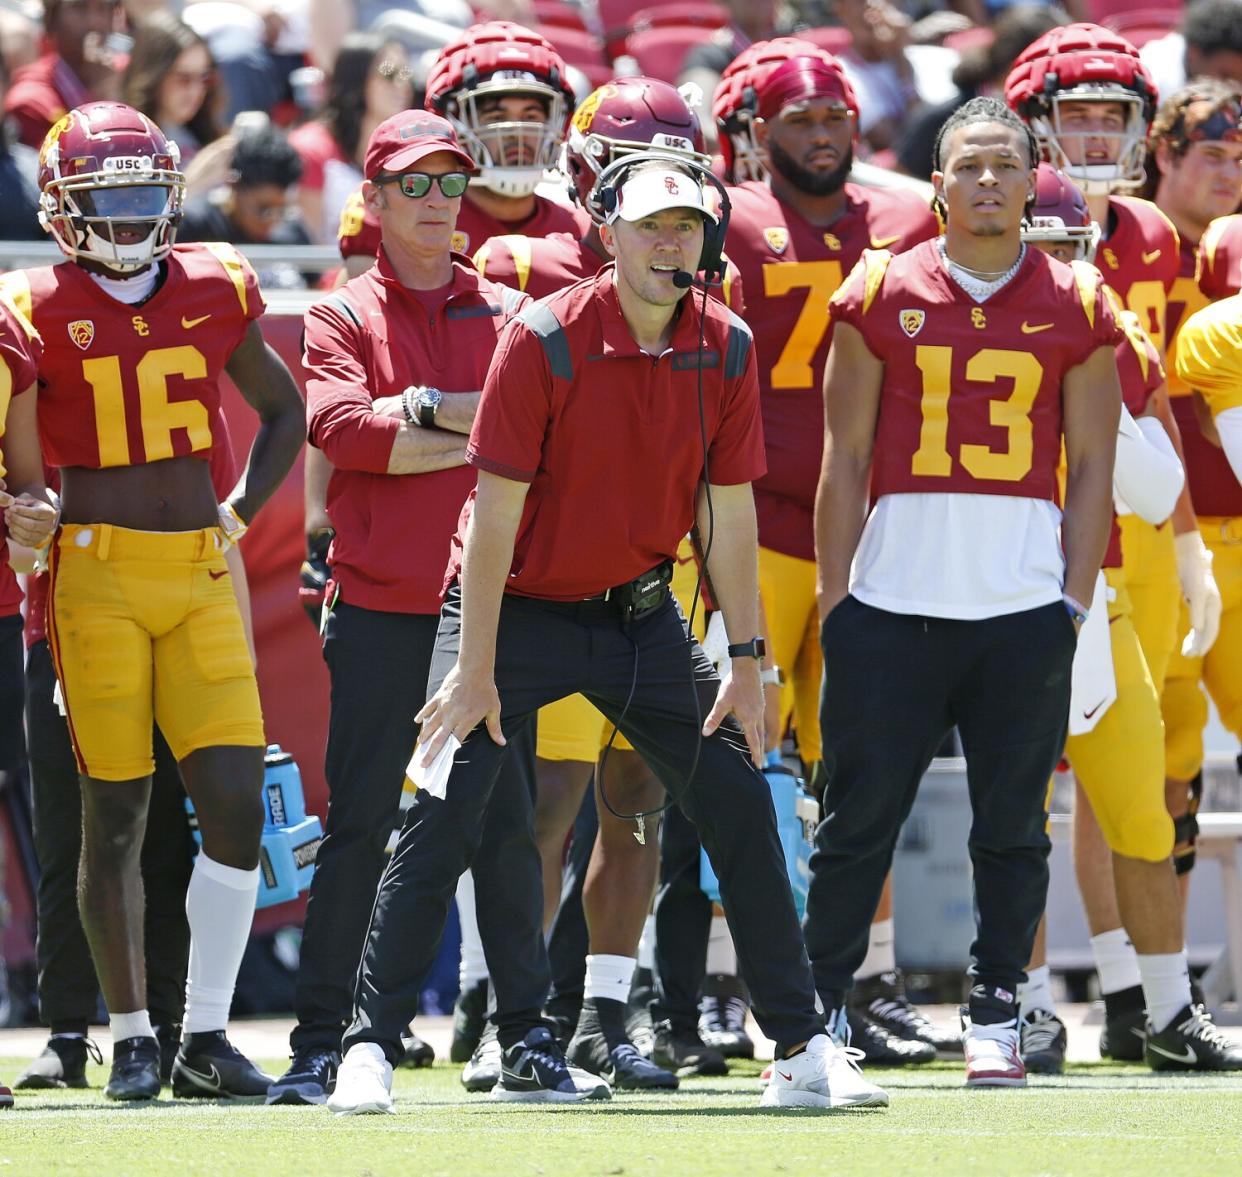 USC coach Lincoln Riley watches from the sideline during the Trojans' spring game at the Coliseum in April.